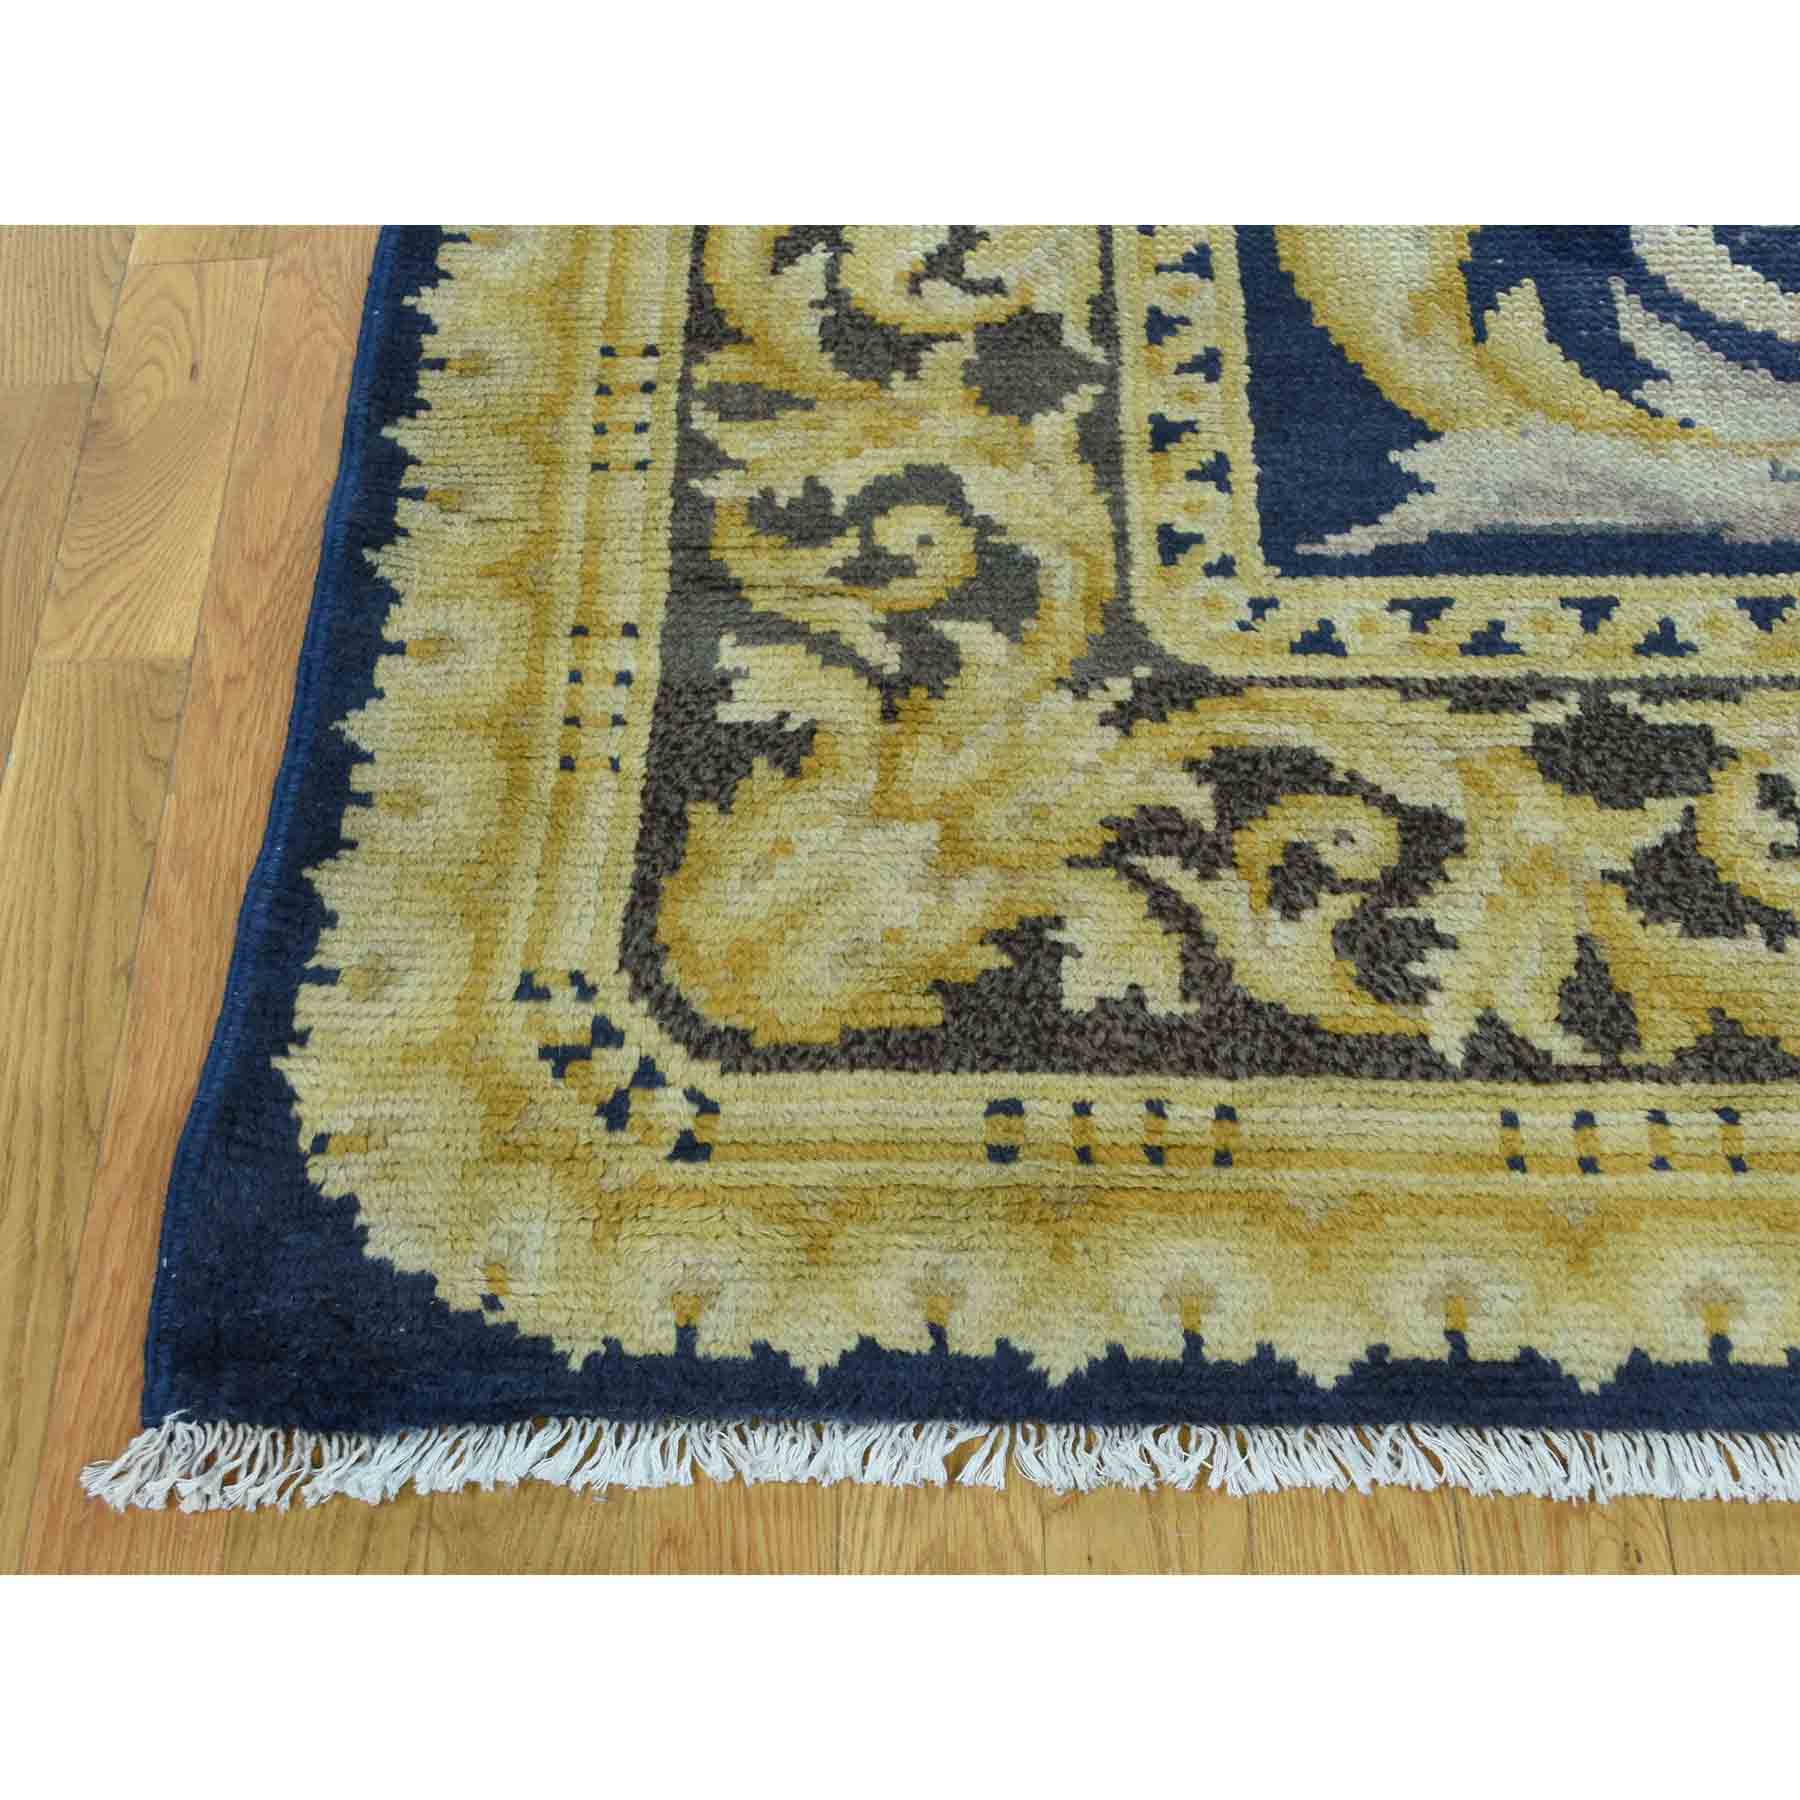 Antique-Hand-Knotted-Rug-172120